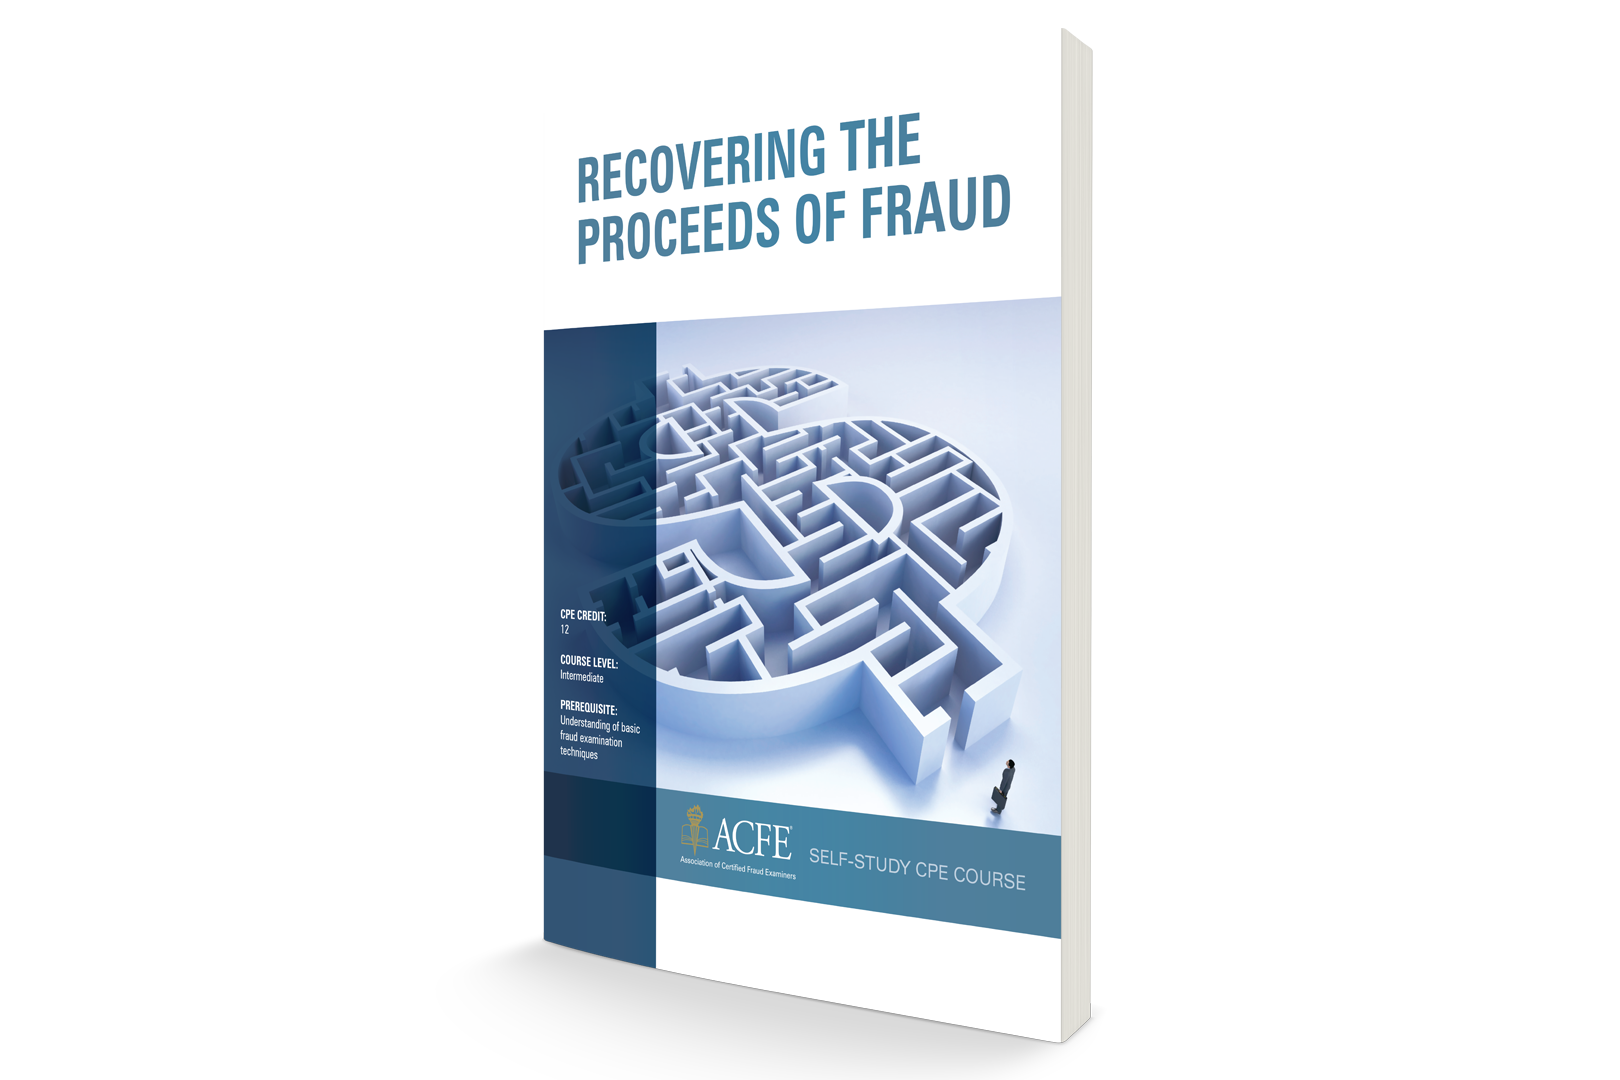 Recovering the Proceeds of Fraud